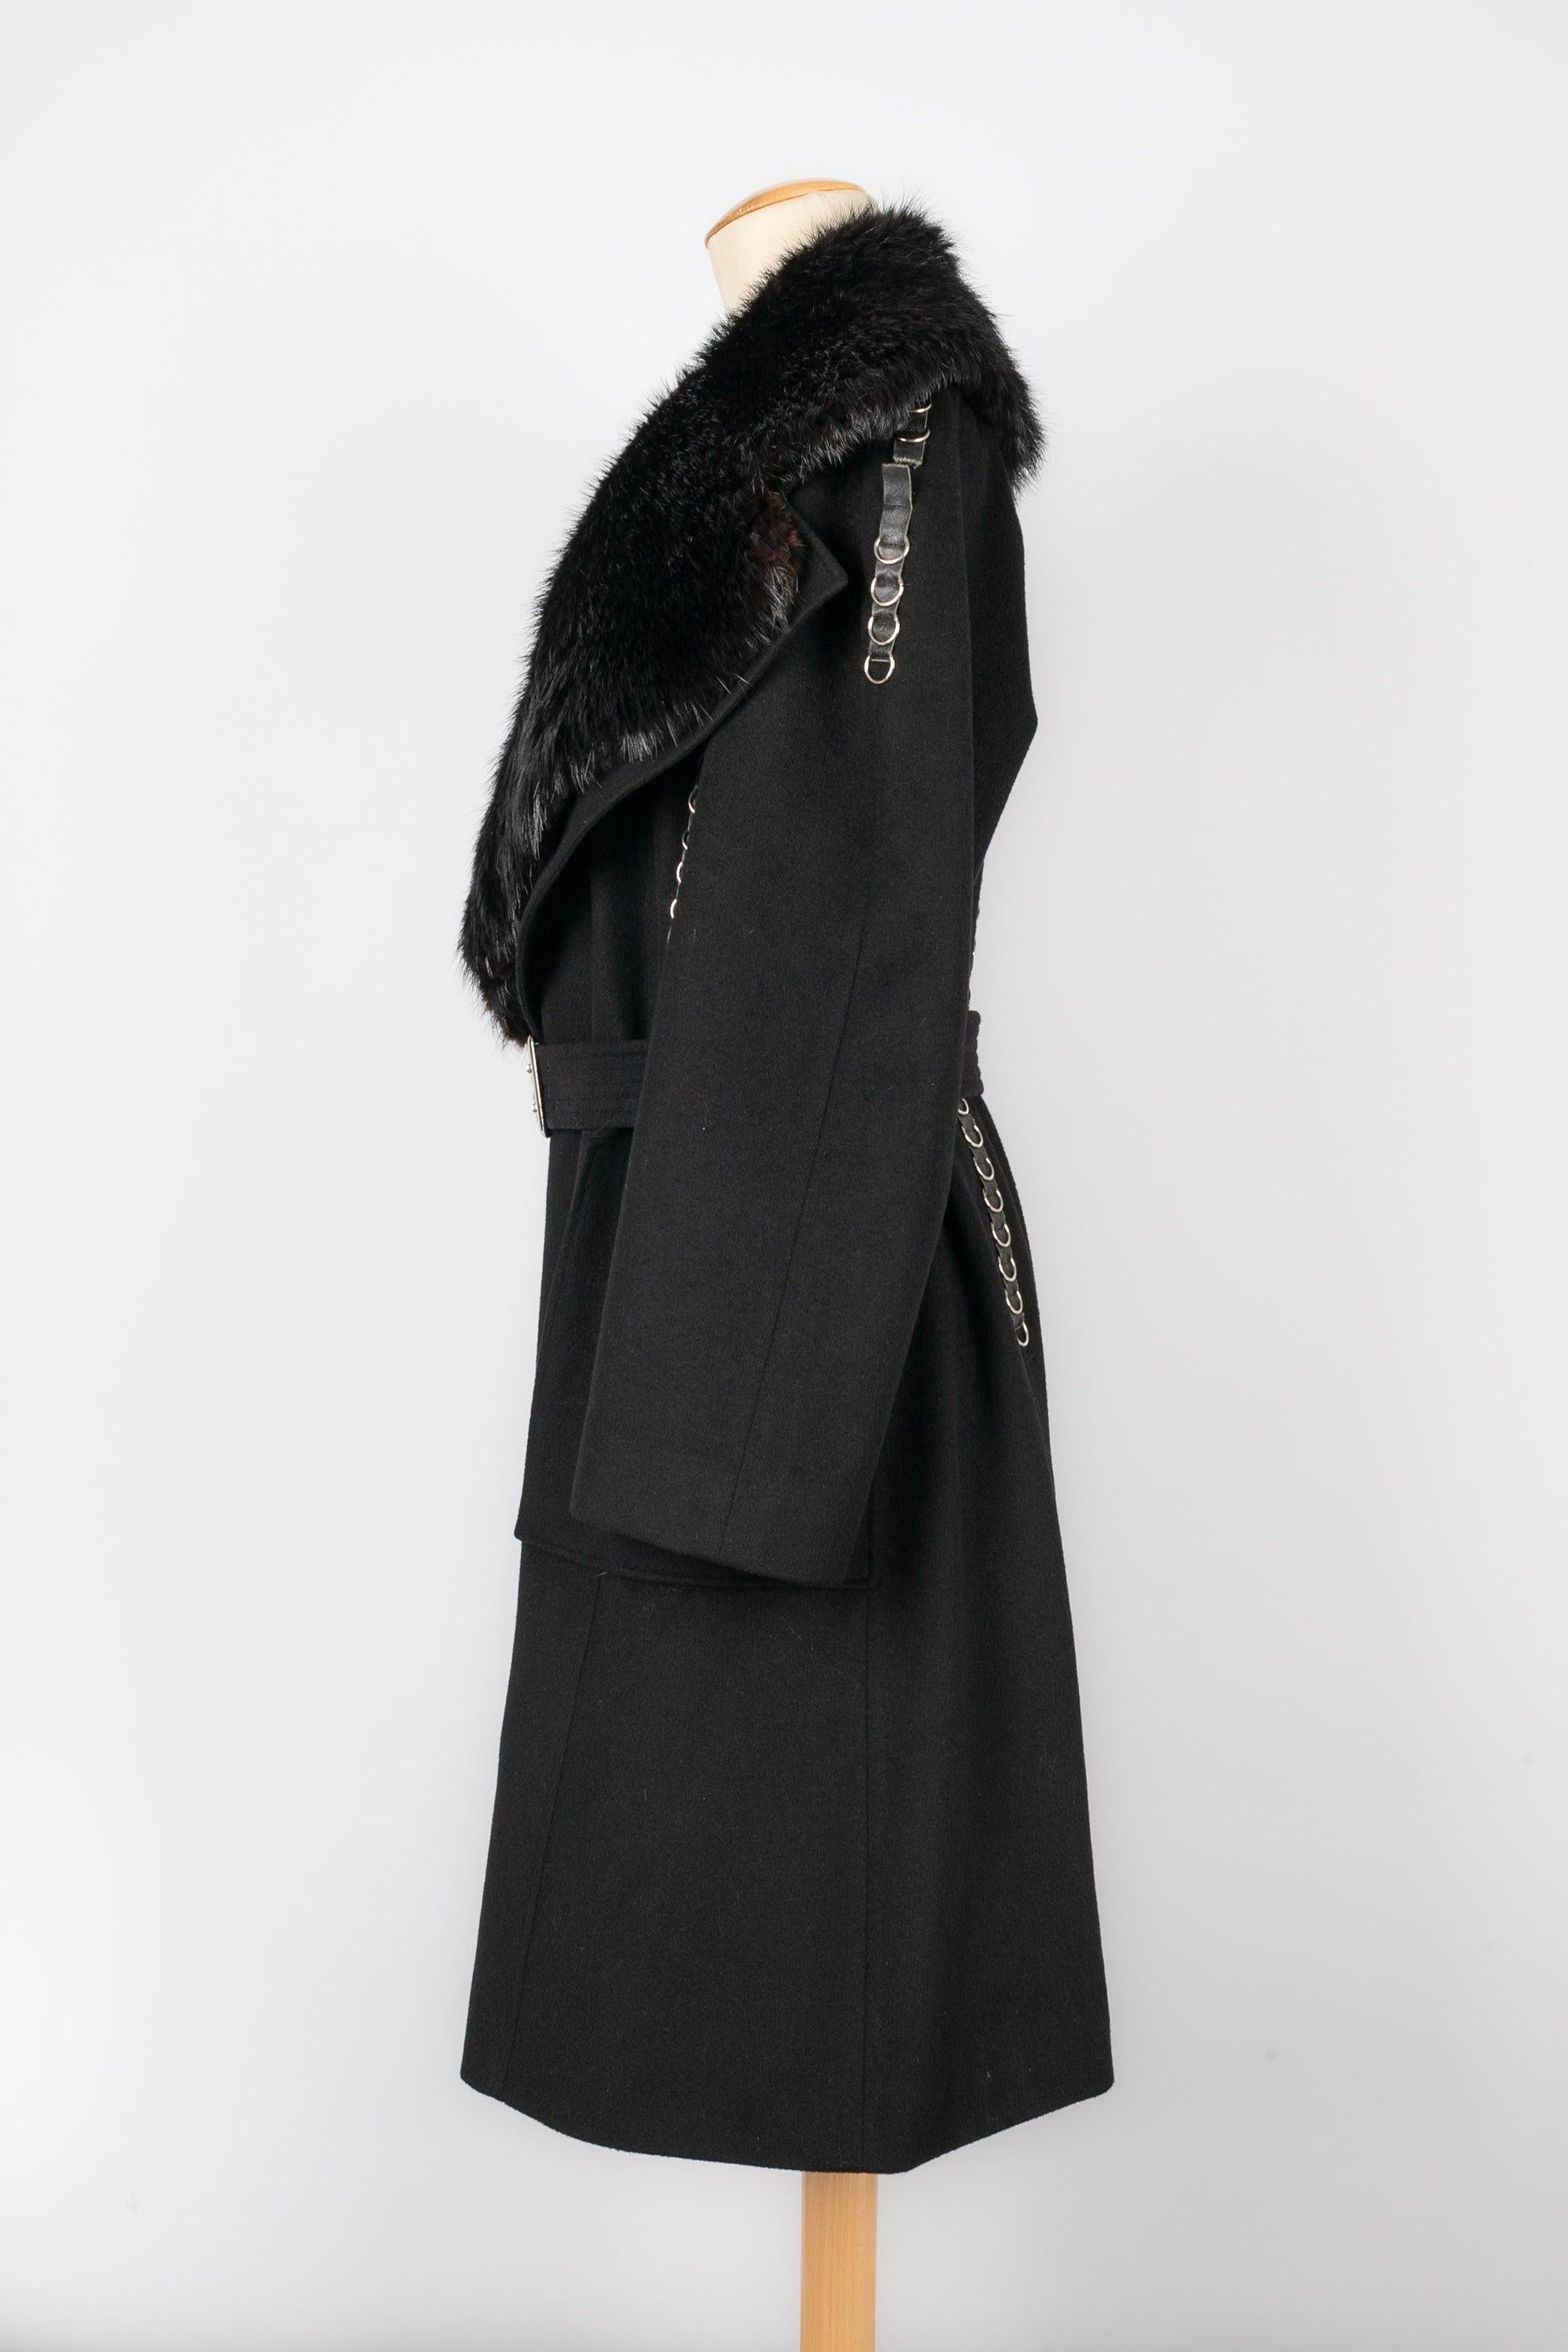 Paco Rabanne - (Made in France) Black long coat ornamented with a fur collar and decorated silvery metal rings. Size 40FR.

Additional information:
Condition: Very good condition
Dimensions: Shoulder width: 44 cm - Chest: 40 cm - Sleeve length: 63